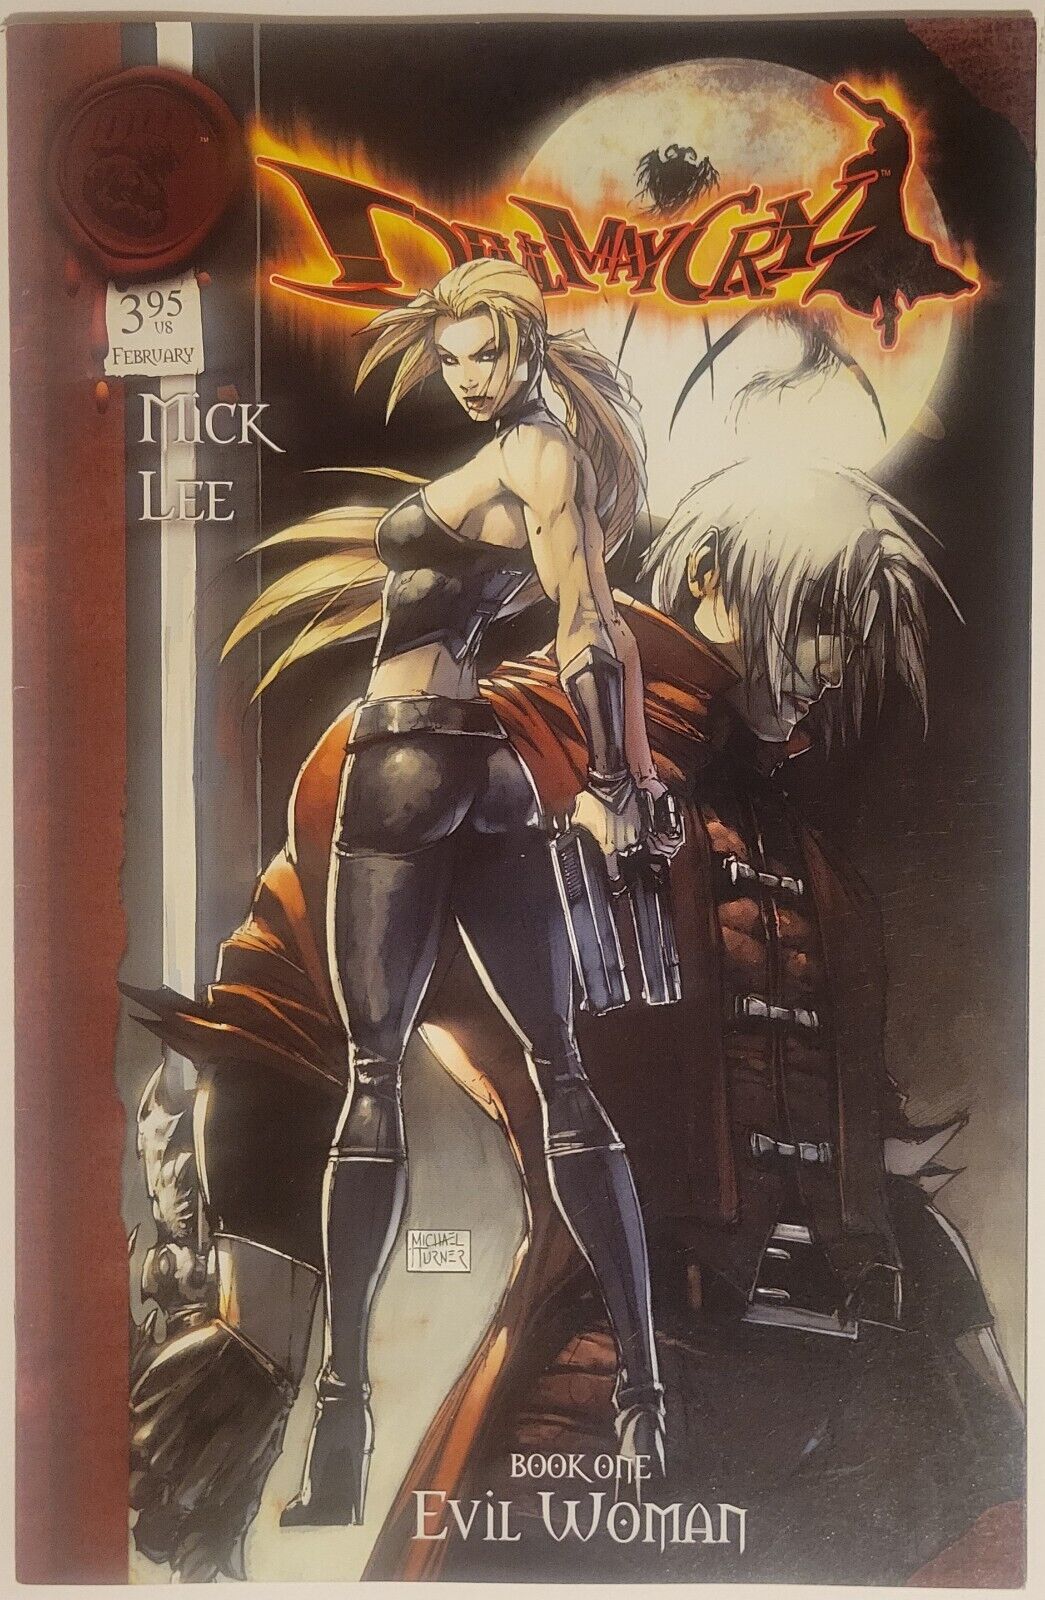 Devil May Cry #1 Book One Evil Woman Michael Turner Variant Dreamwave